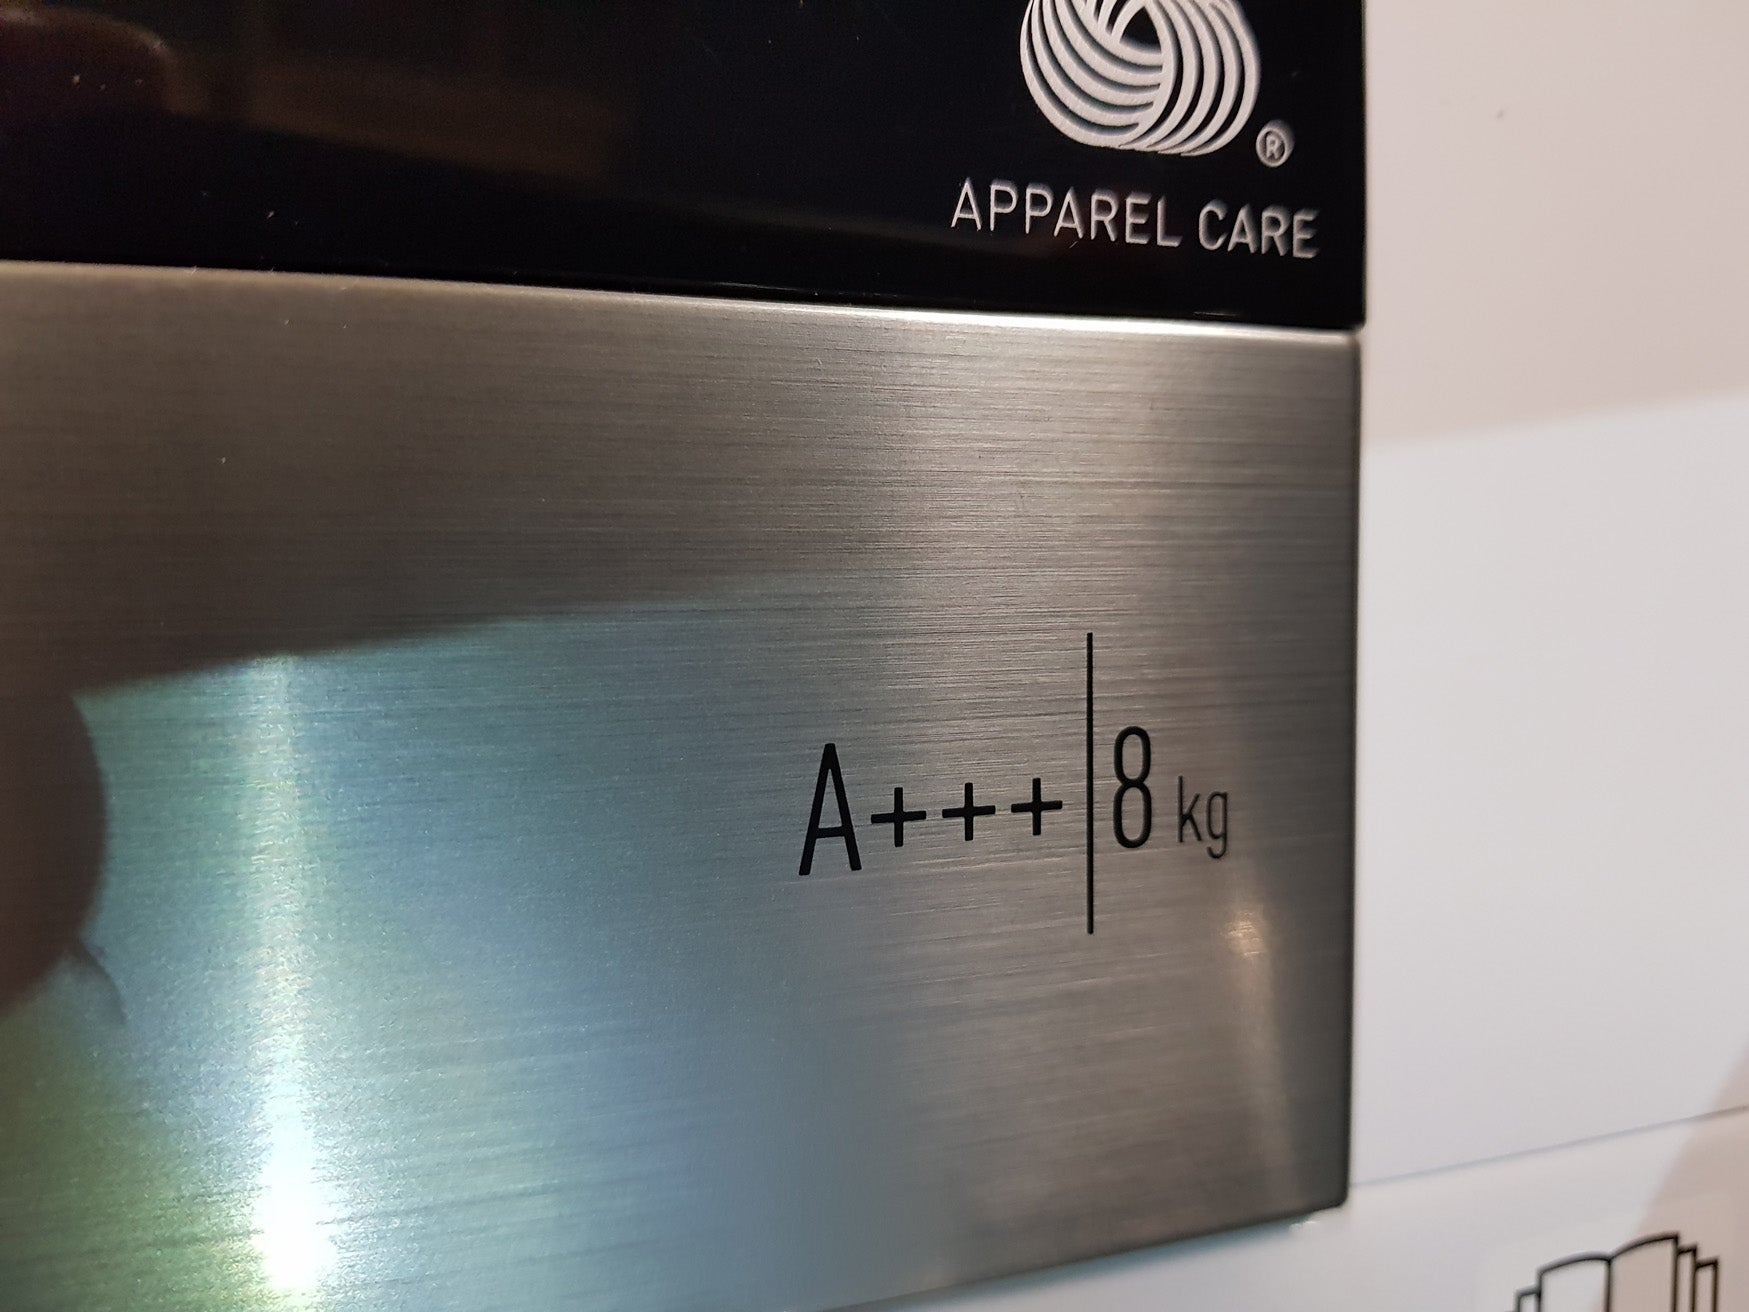 Close-up of Grundig dryer efficiency rating label A+++ and 8 kg capacity.